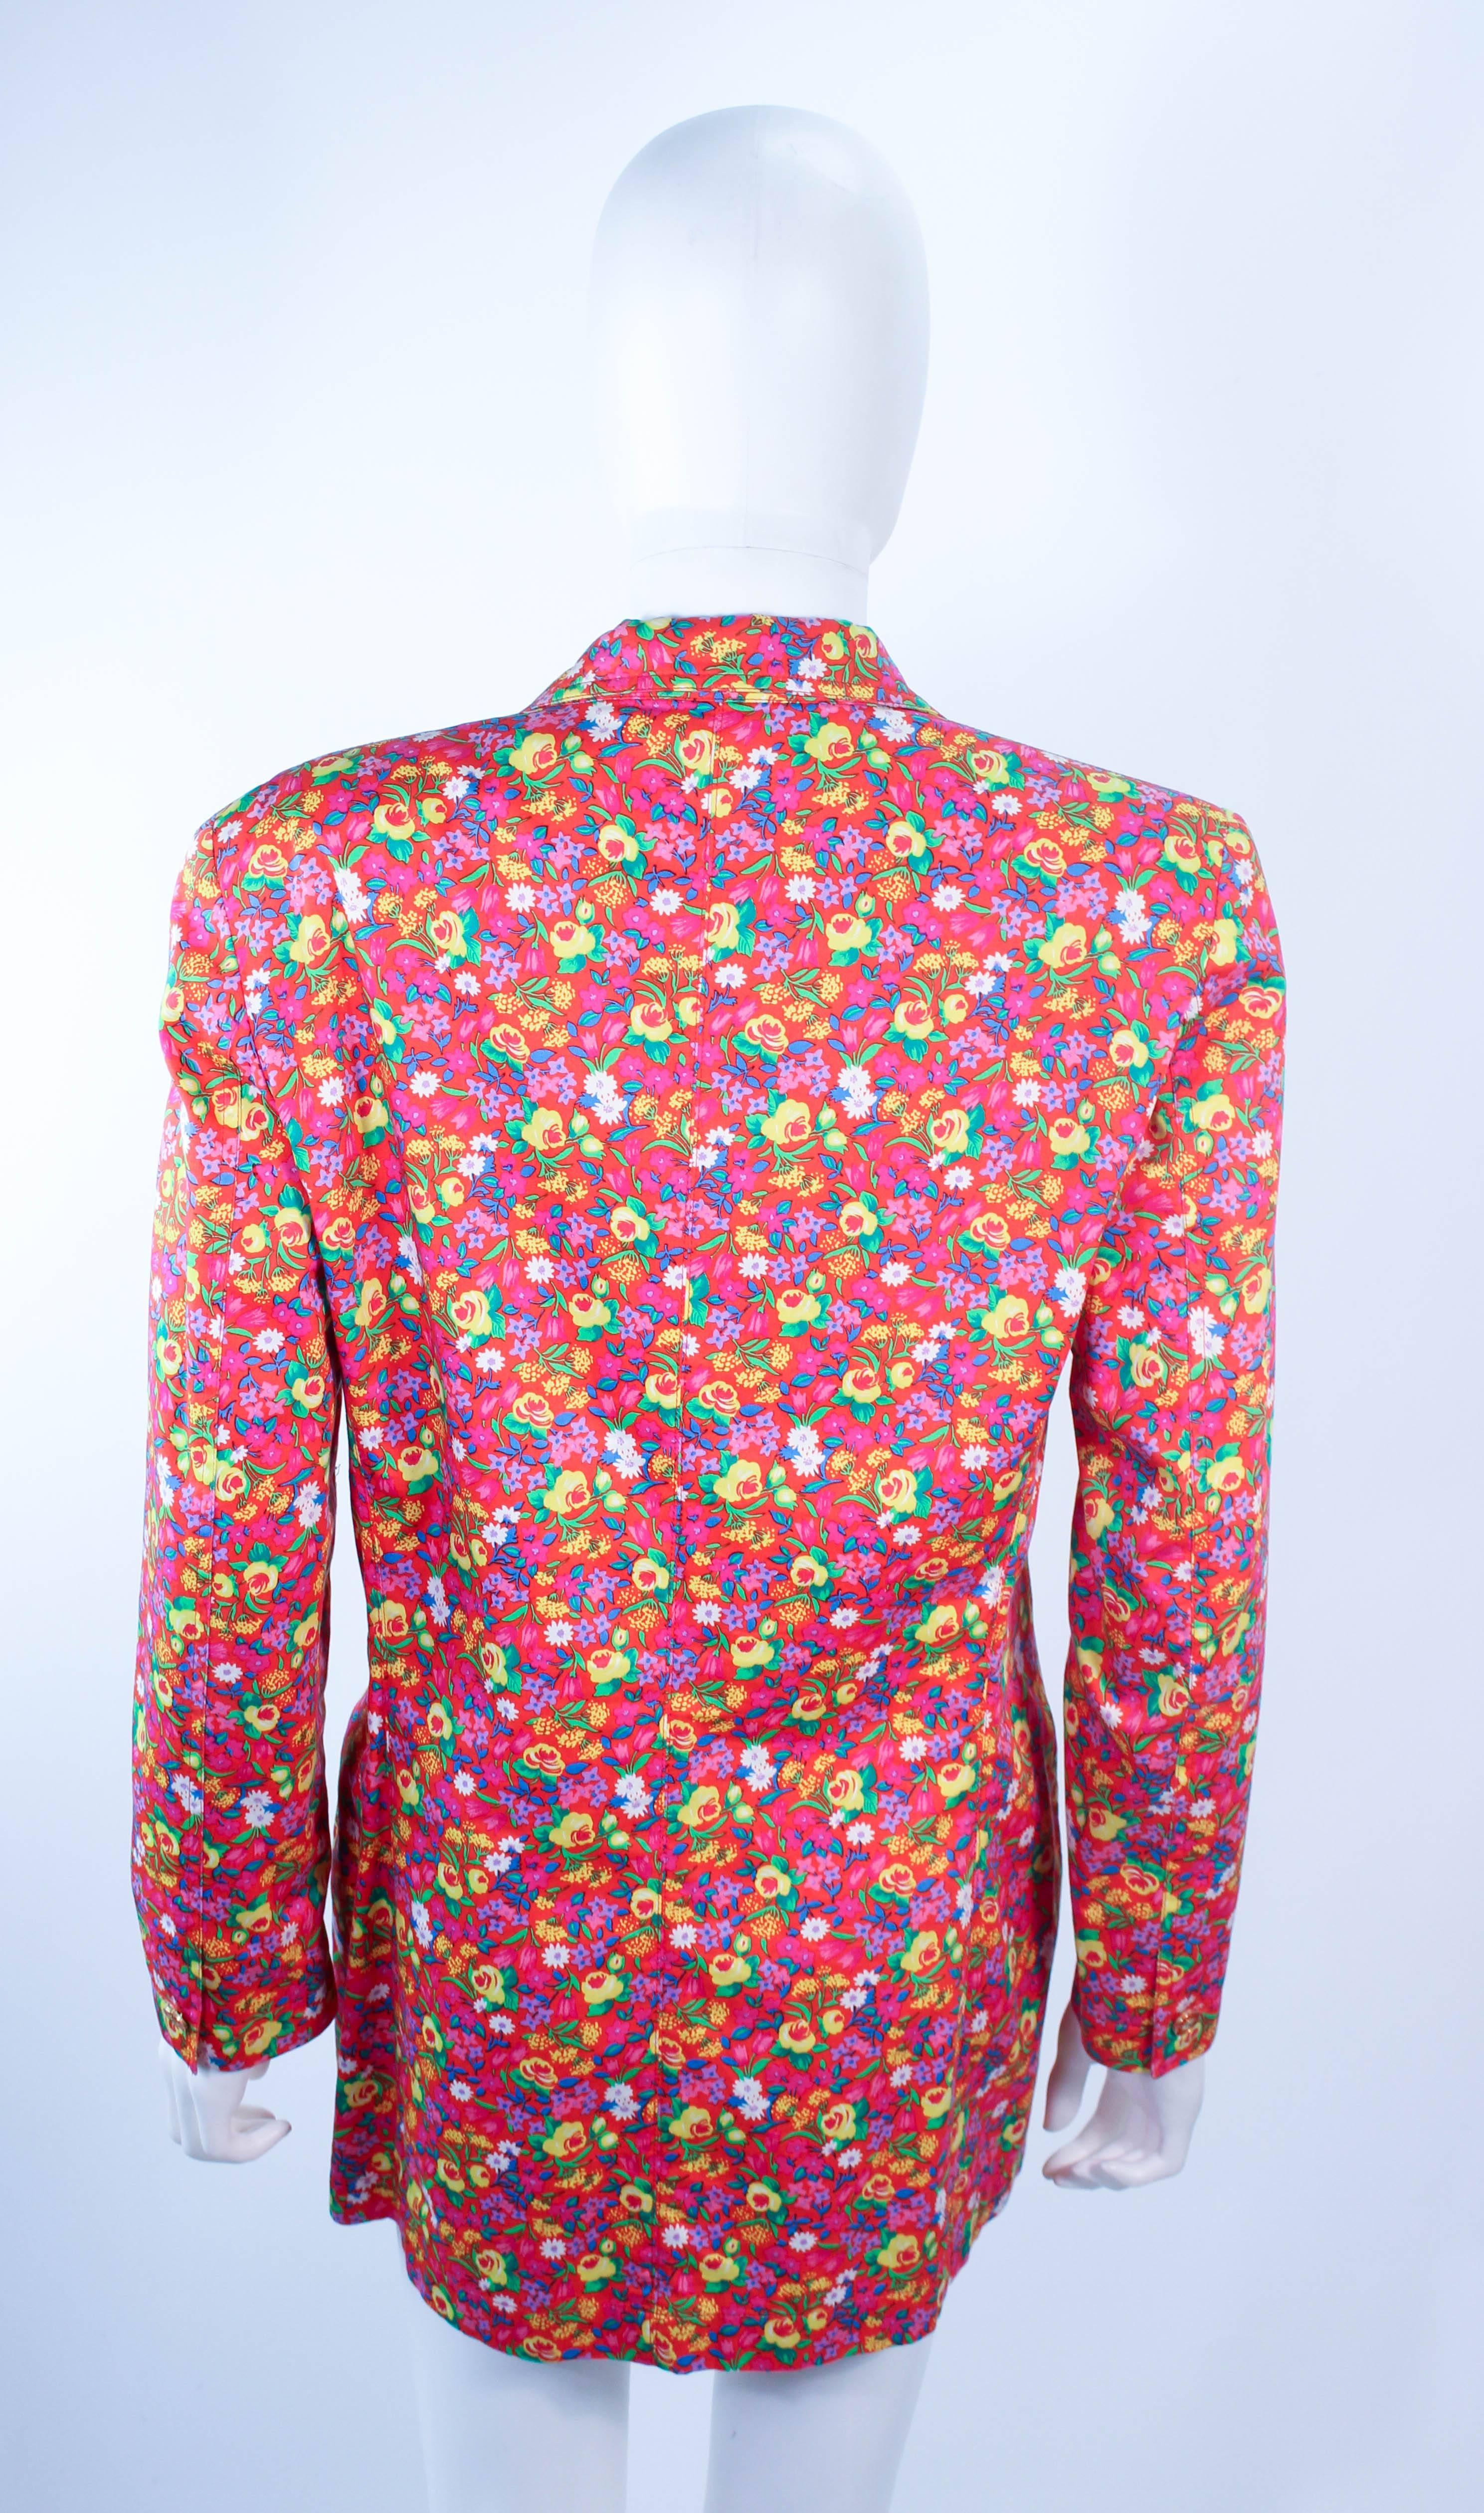 GIANNI VERSACE Vintage Floral Print Blazer with Medusa Buttons Size 8 10 In Excellent Condition For Sale In Los Angeles, CA